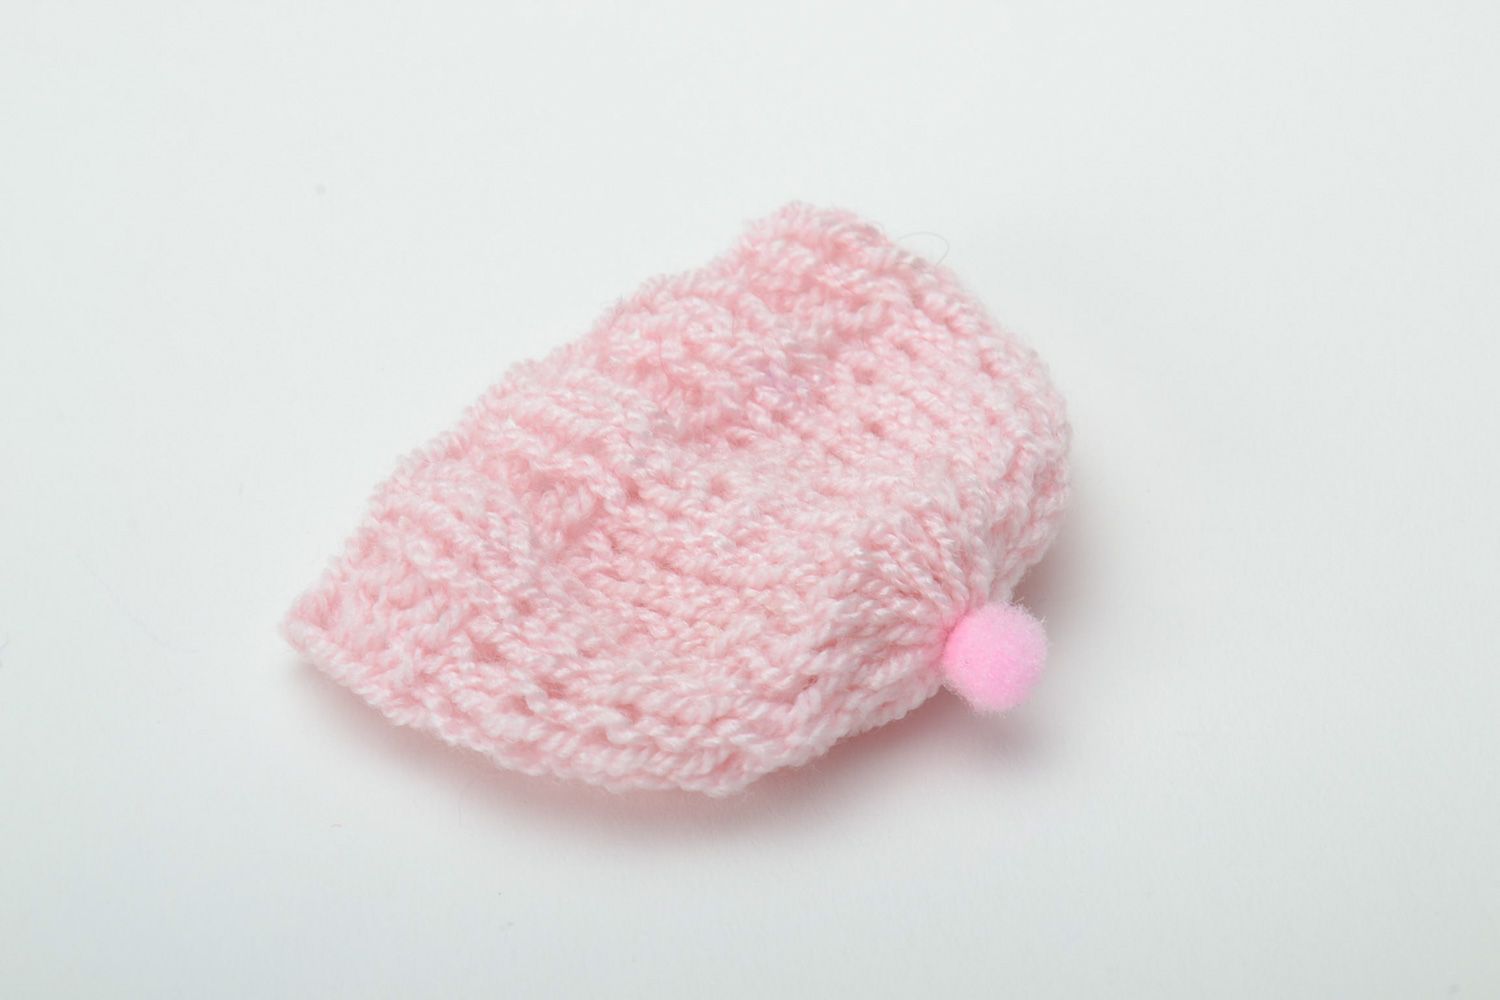 Handmade pink knitted Easter egg cozy photo 3